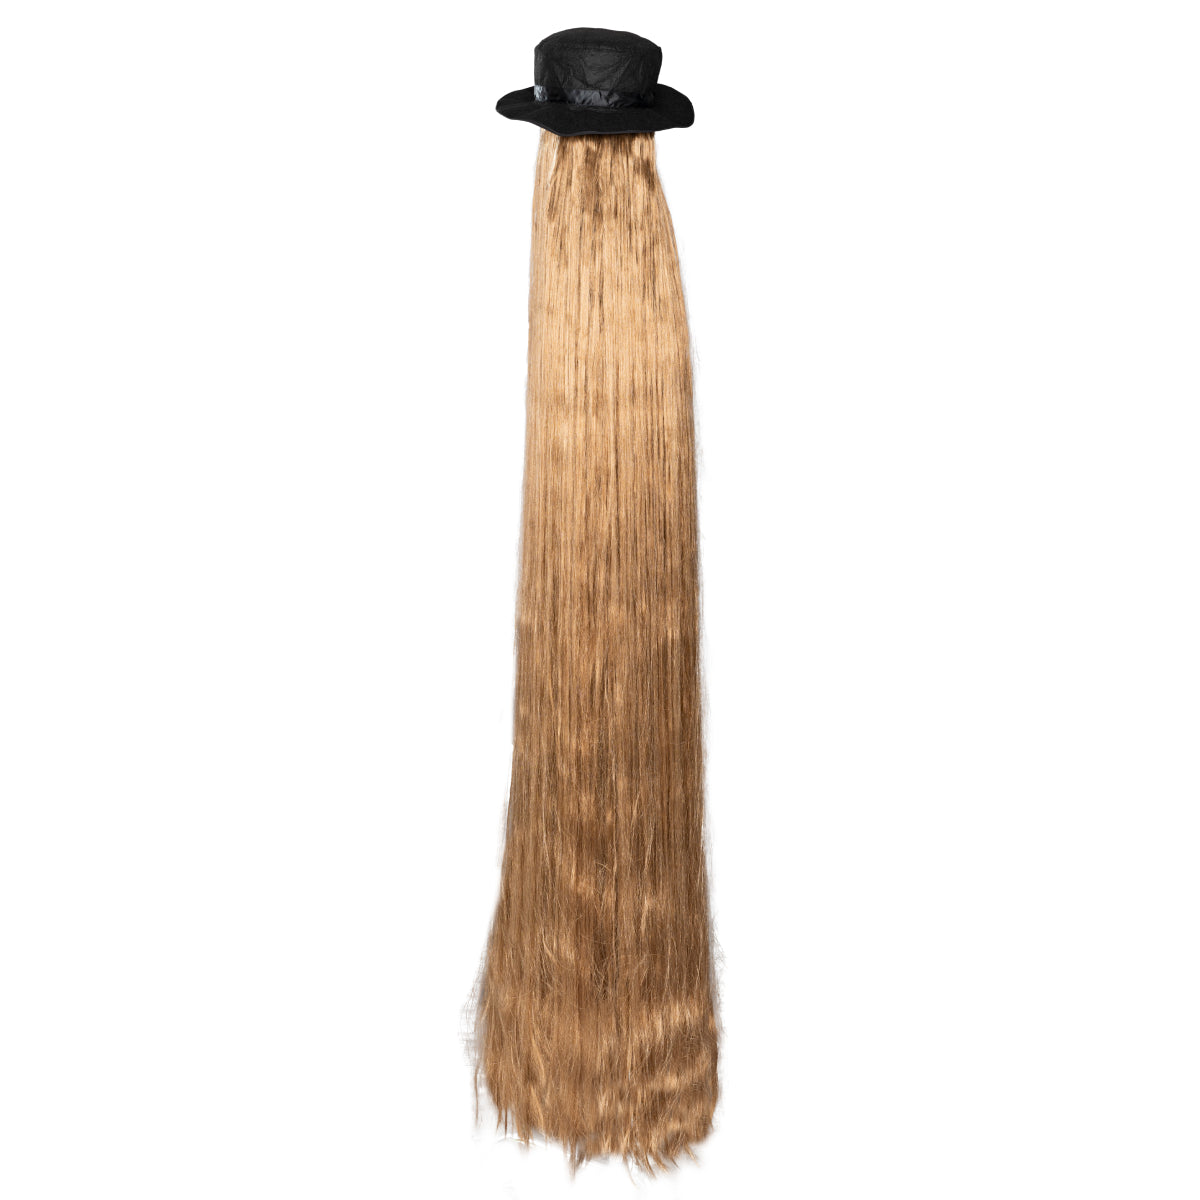 Get Hairy with Cousin ITT Adams Family Long Hair Cousin Wig for Halloween Costume Cosplay Back view